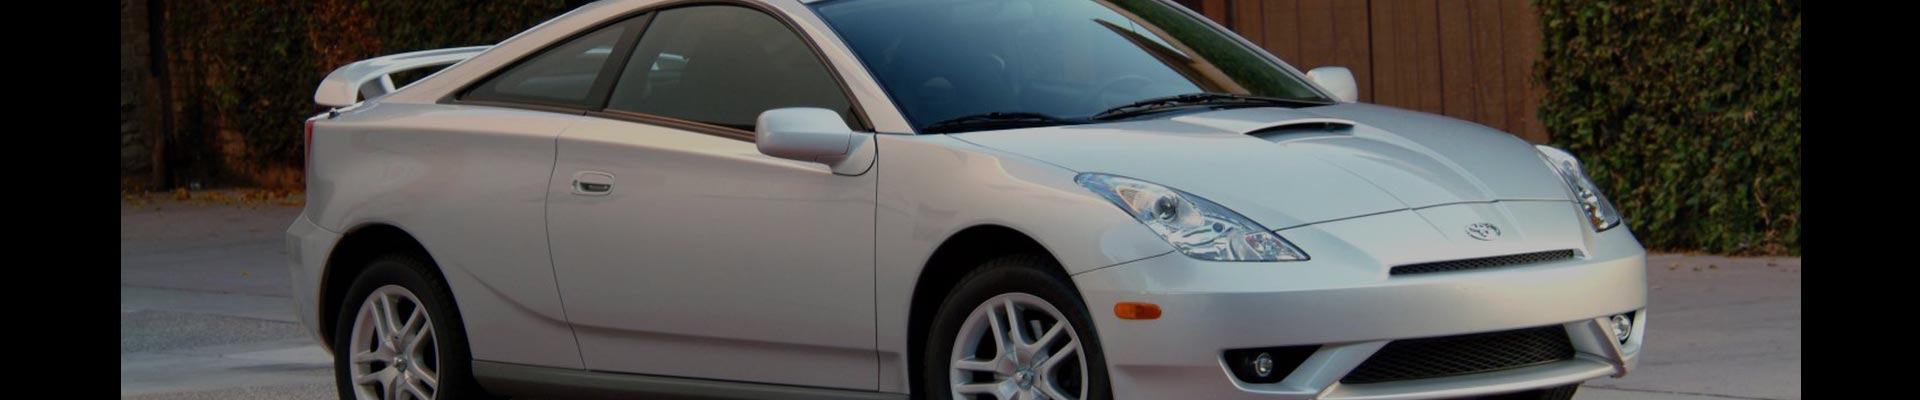 Shop Replacement and OEM 1994 Toyota Celica Parts with Discounted Price on the Net